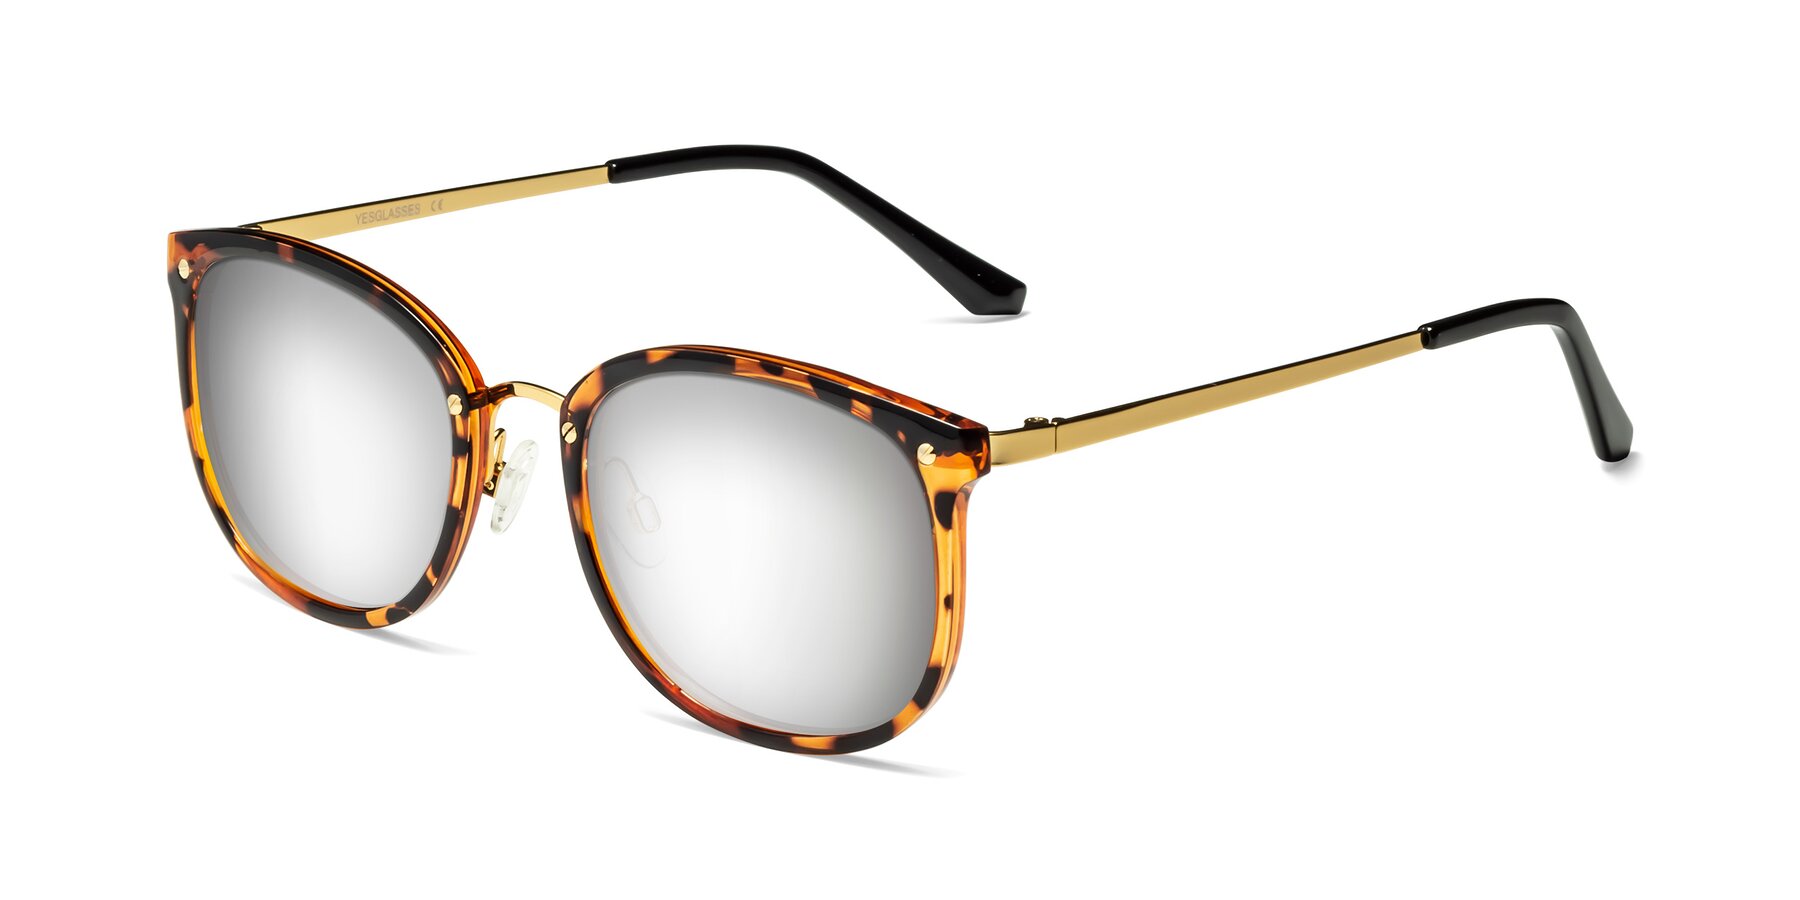 Angle of Timeless in Tortoise-Golden with Silver Mirrored Lenses